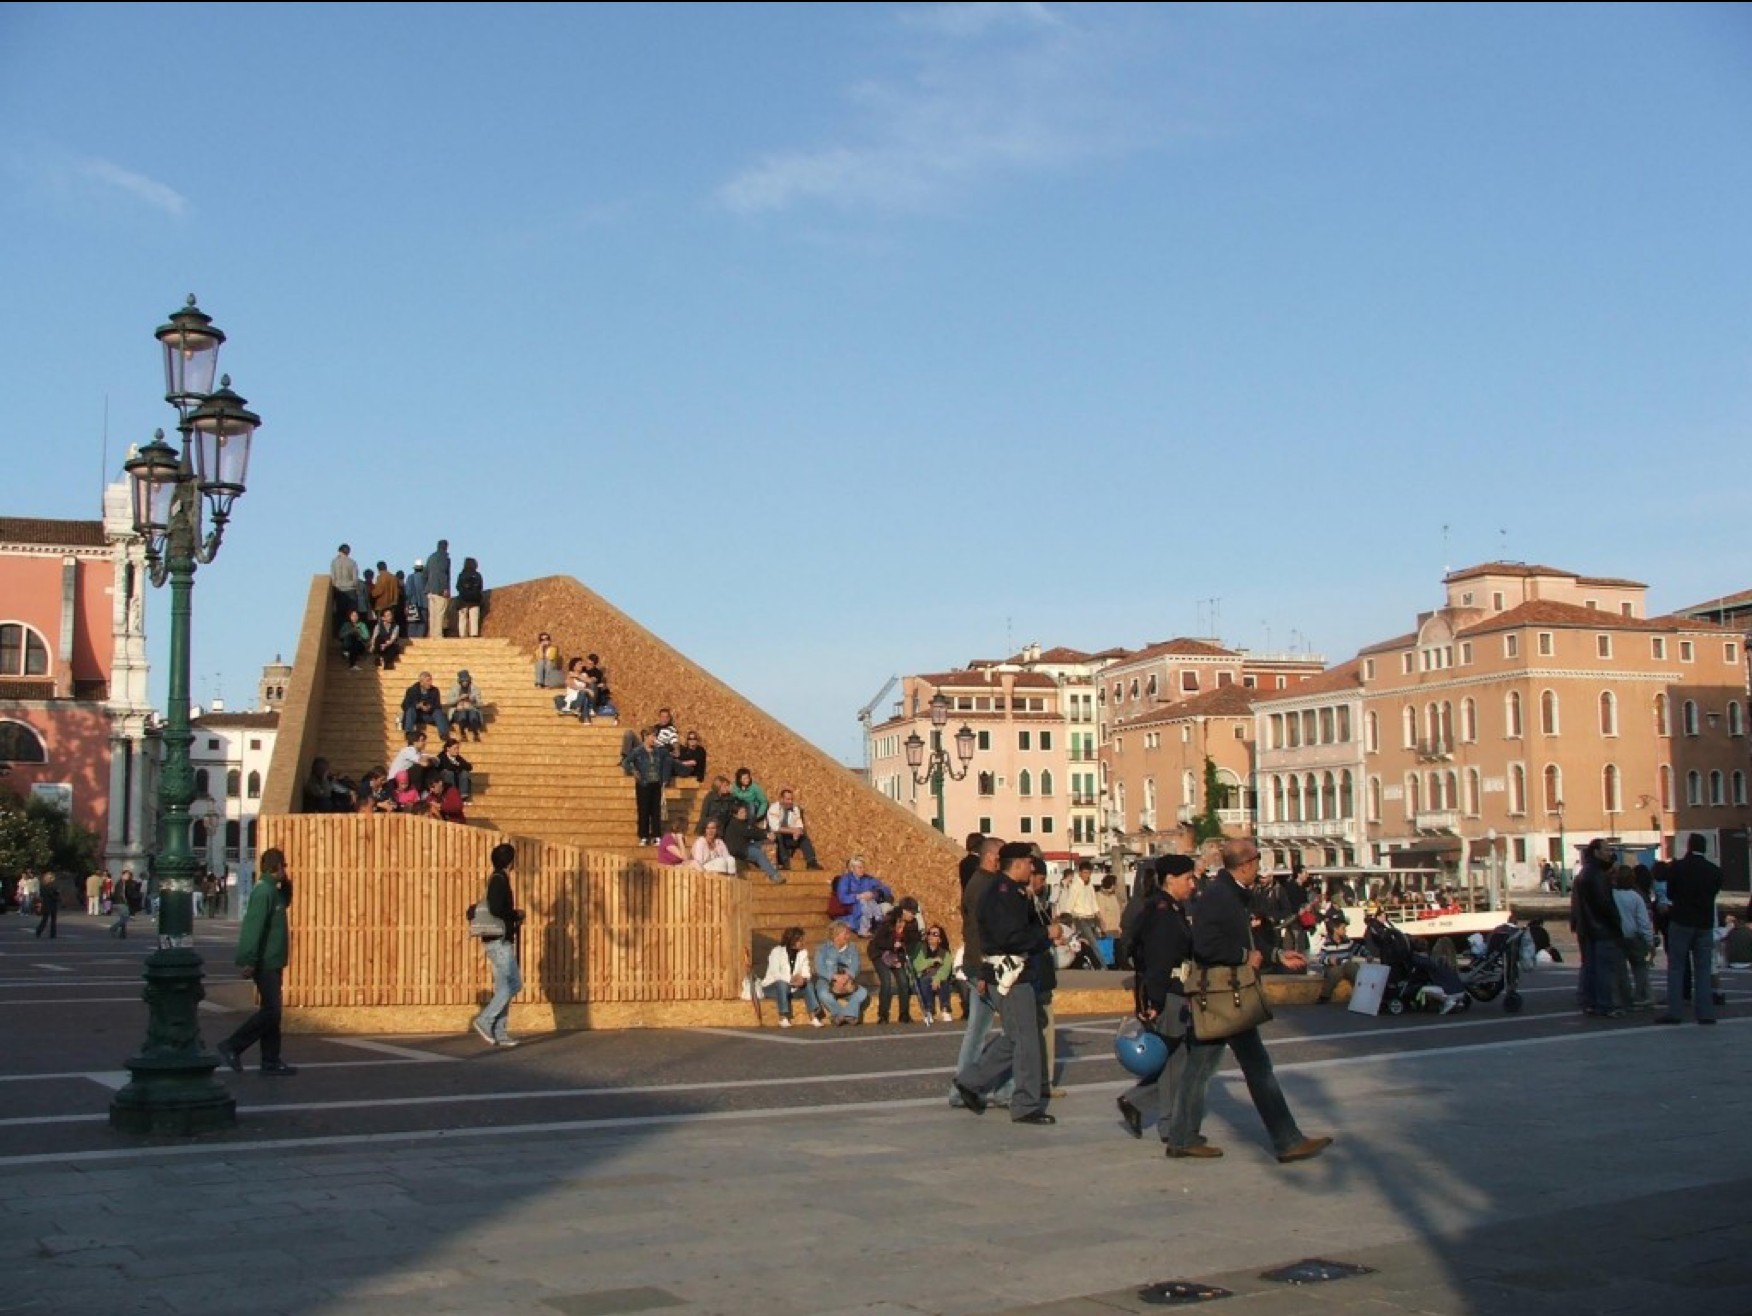 Under a blue sky in a busy Italian piazza is a high wooden structure with steps running up to the top. People are sitting on the steps or looking at the view from the top.